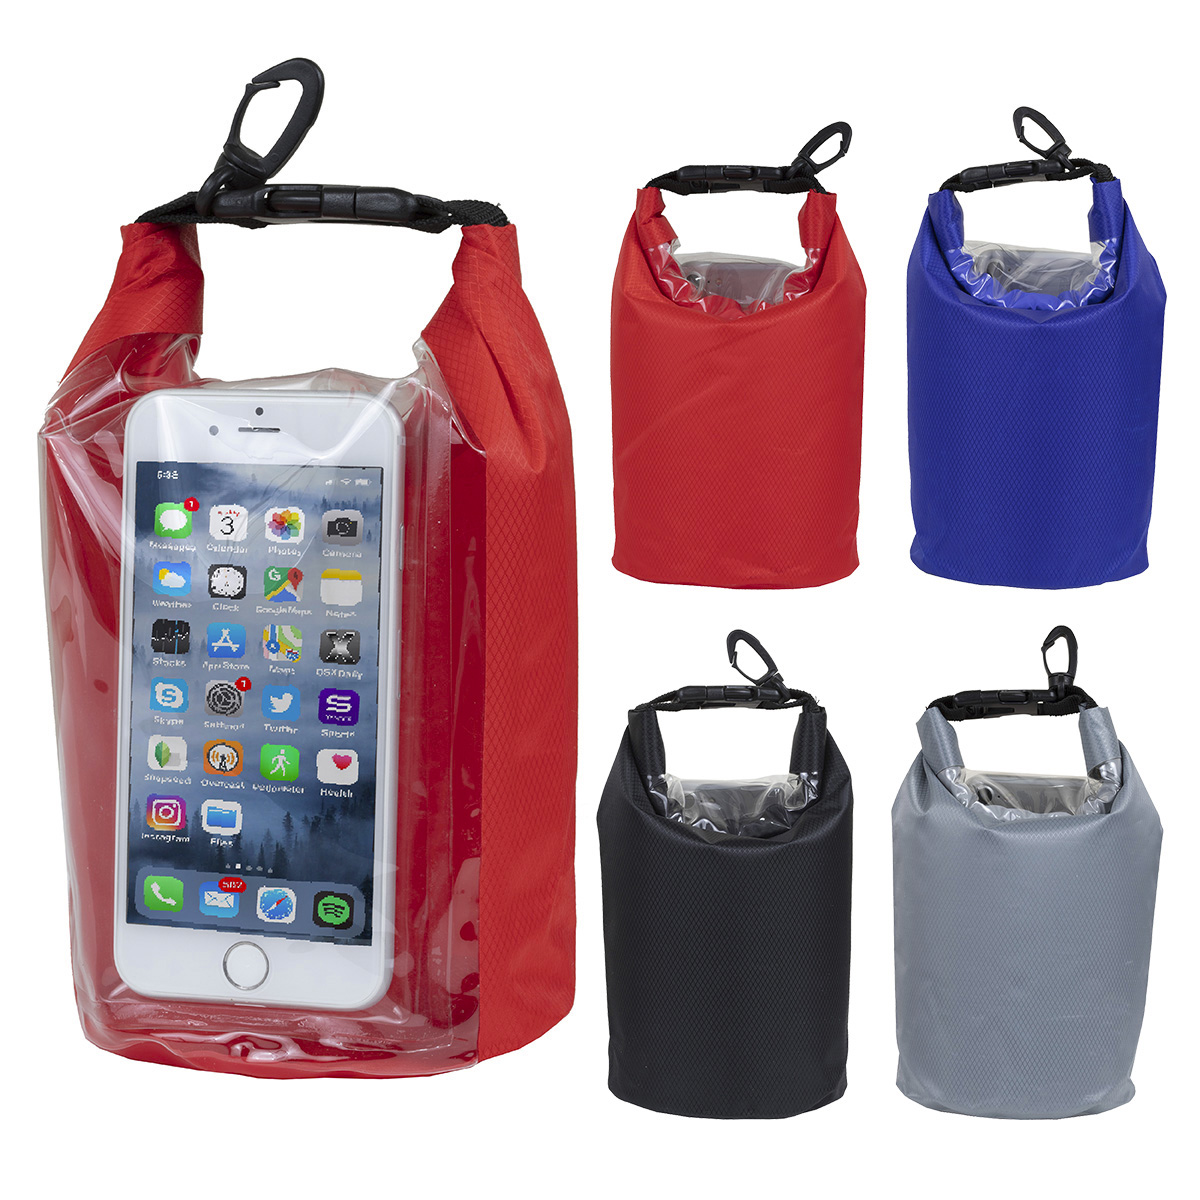 7" W x 11" H "THE NAVAGIO" 2.5 Liter Water Resistant Dry Bag With Clear Pocket Window